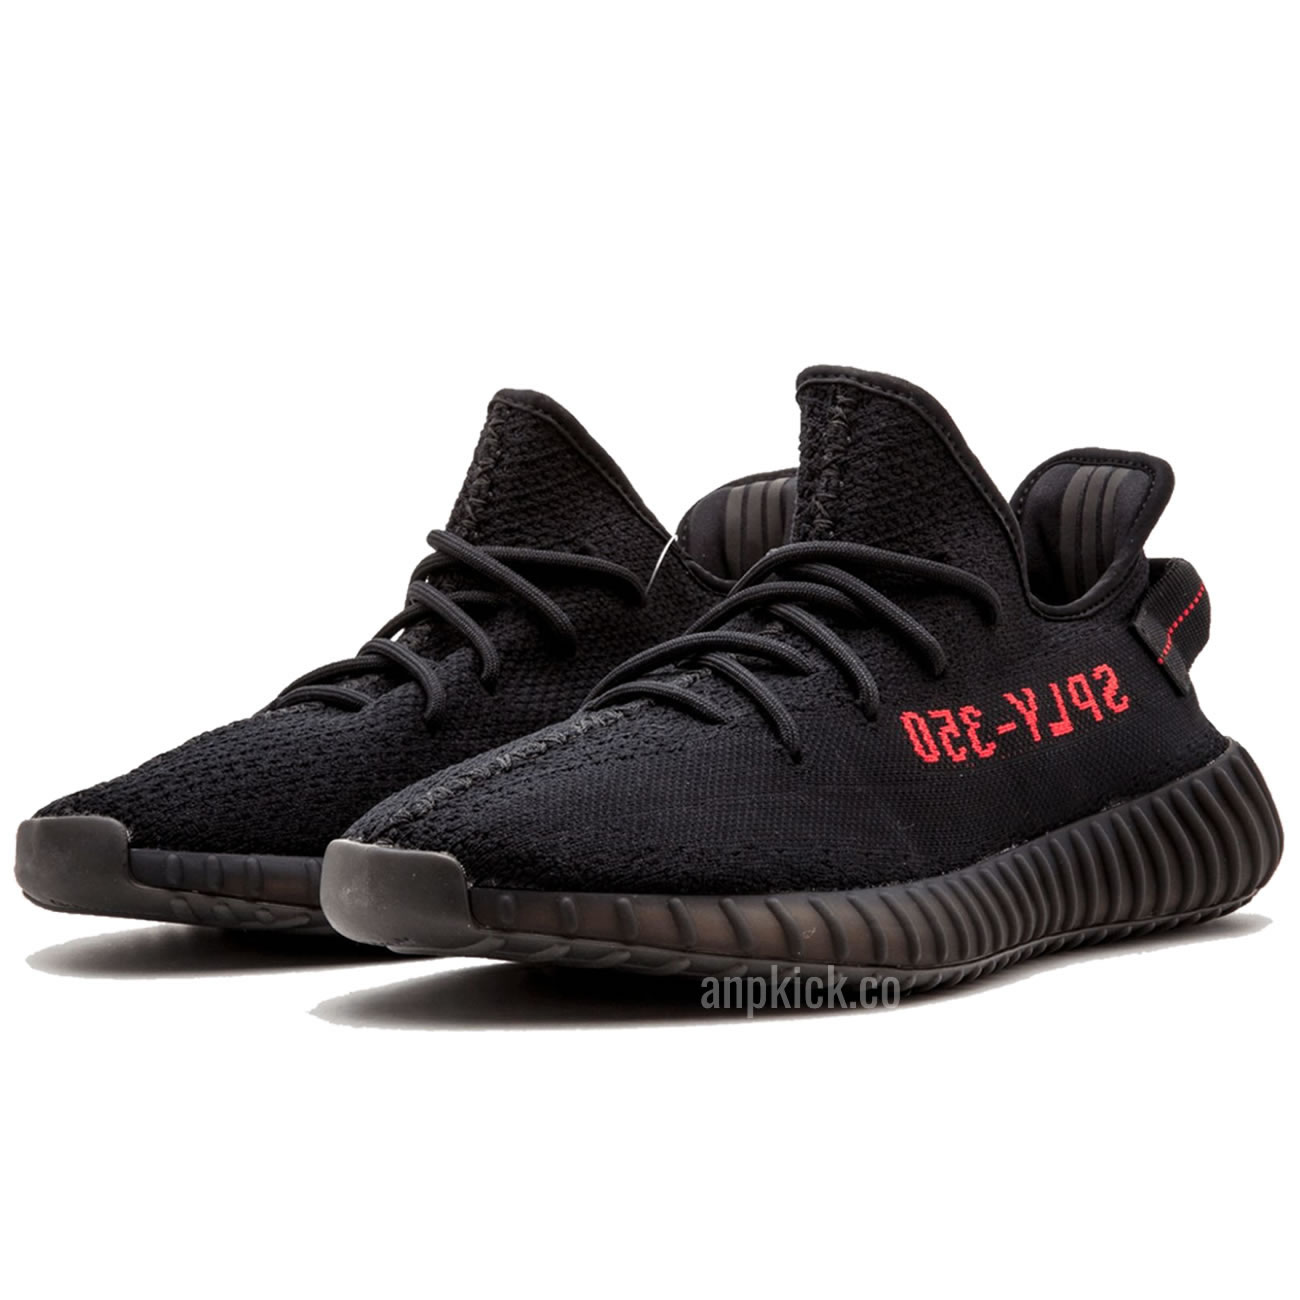 Yeezy Boost 350 V2 Bred Black Red 2020 New Release Cp9652 (2) - www.newkick.org